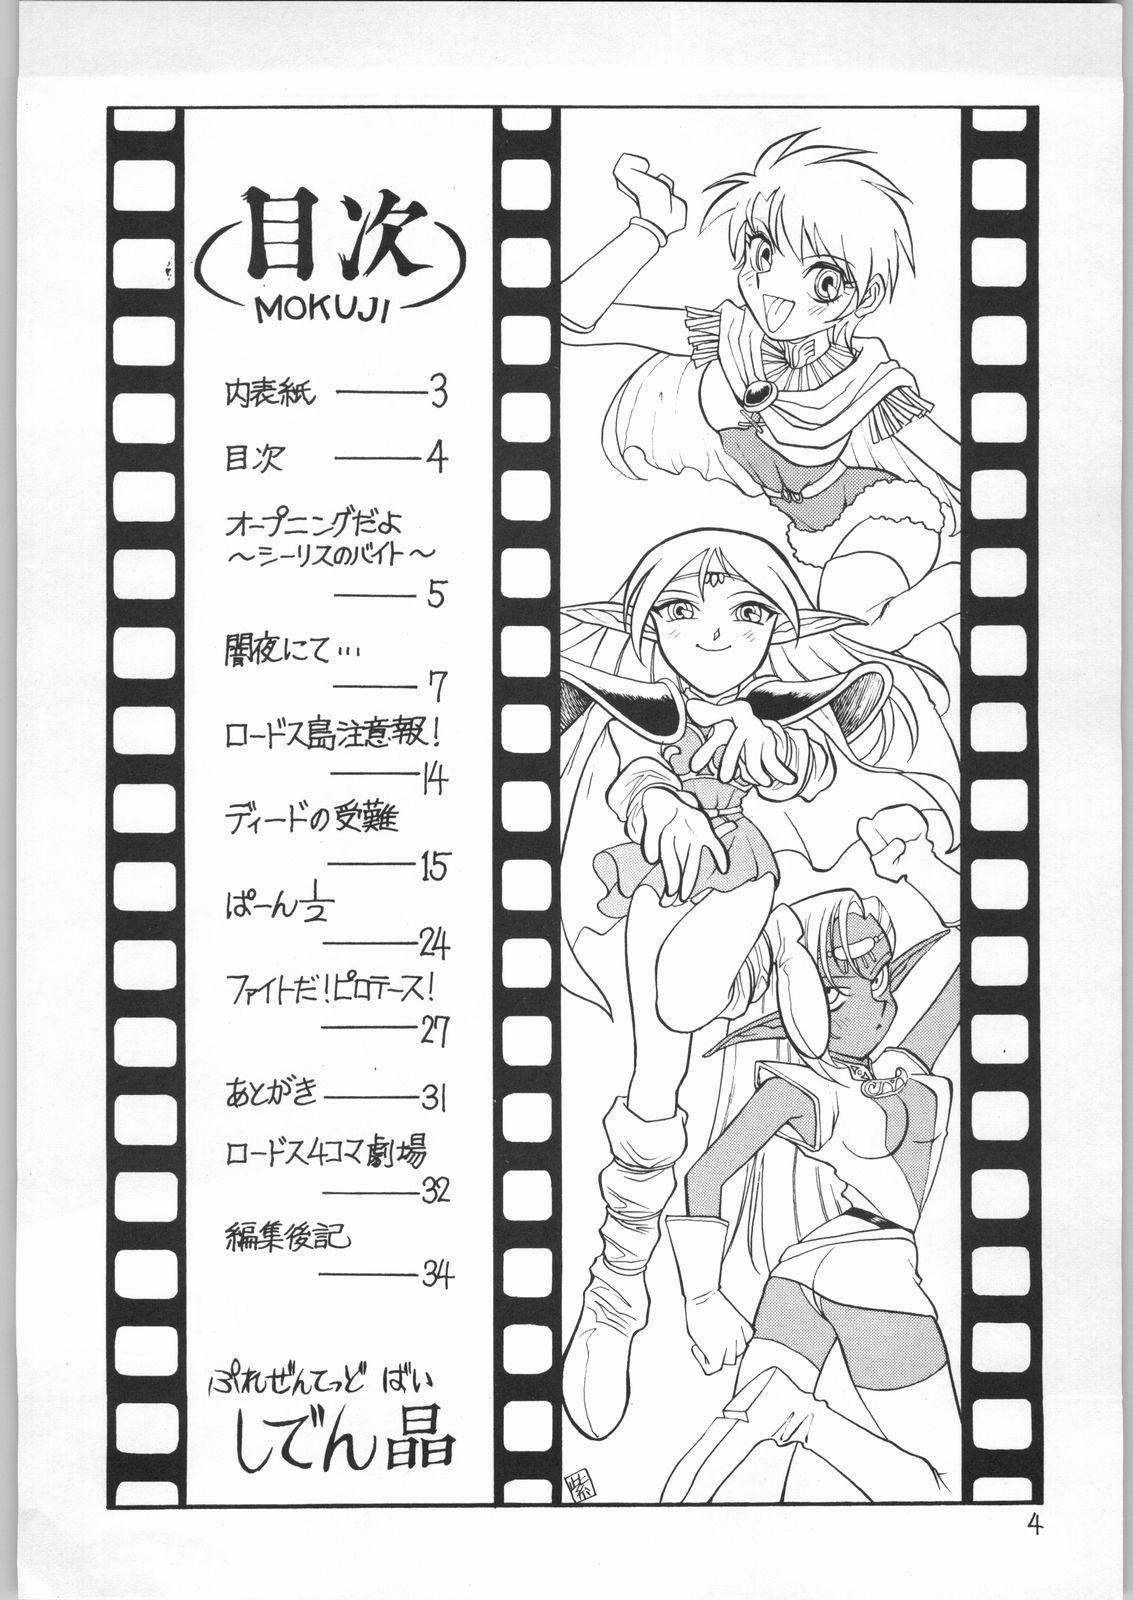 Movies Heroic Dreams - Record of lodoss war Str8 - Page 3